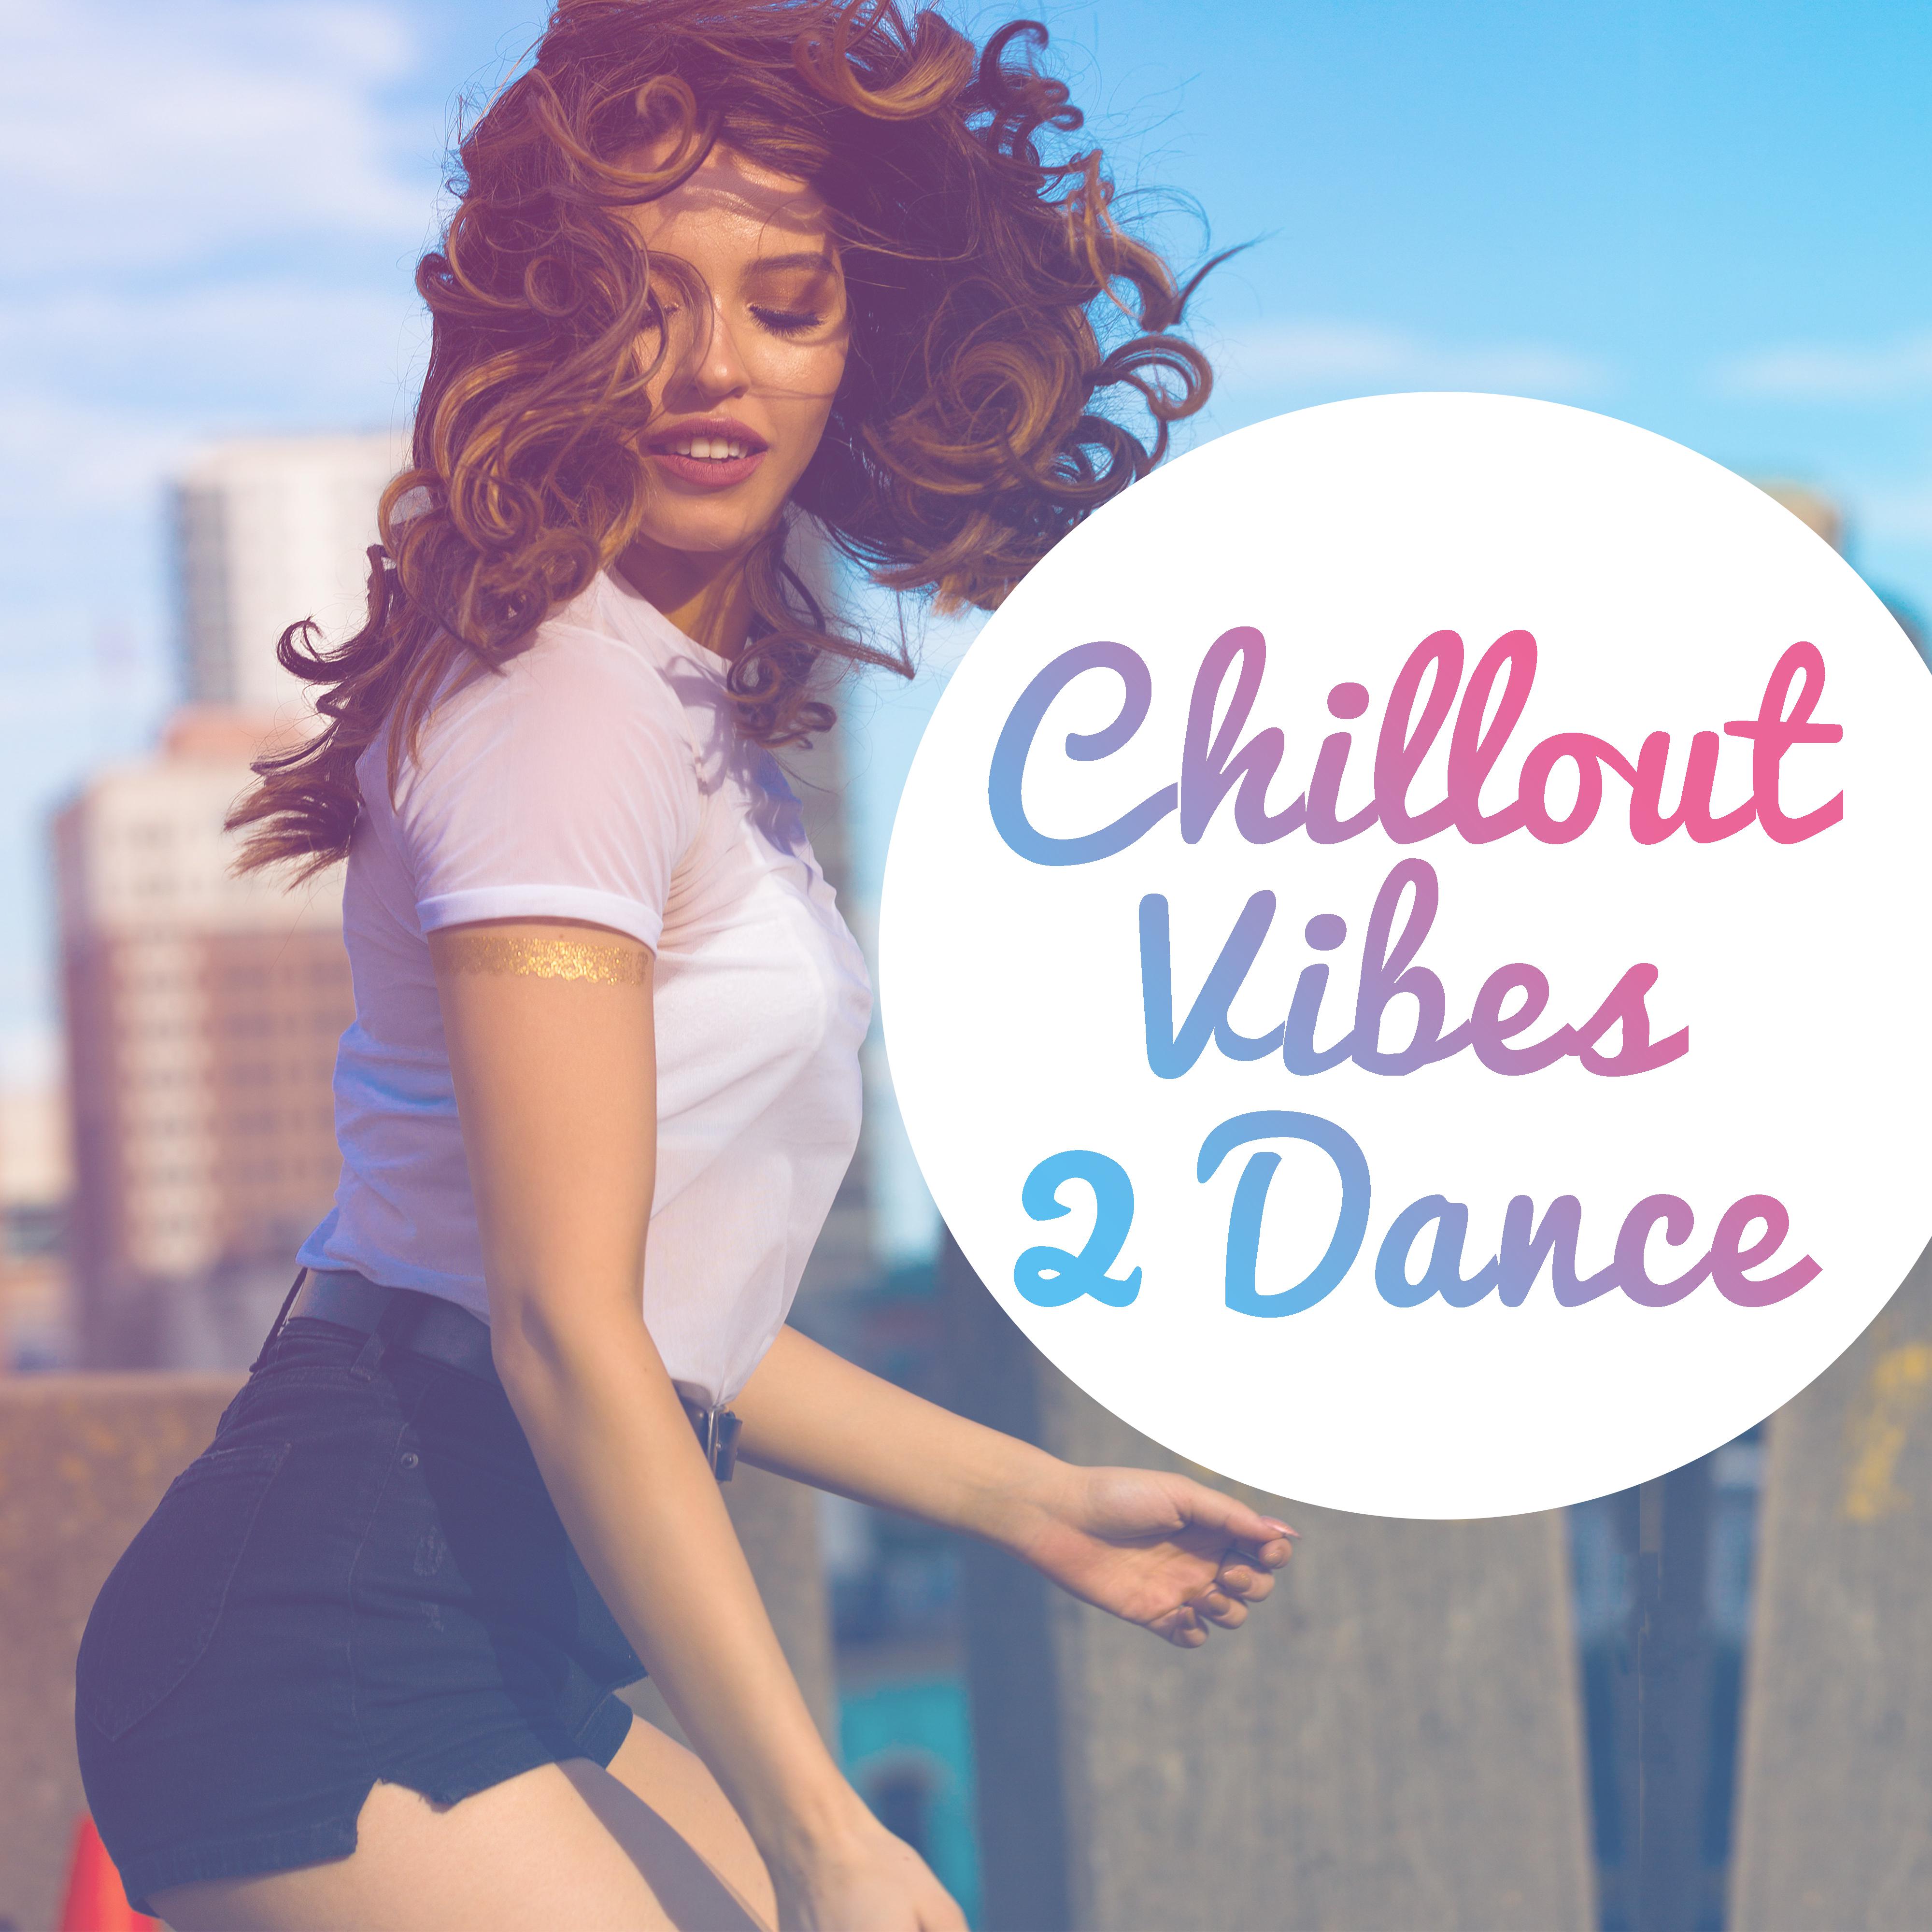 Chillout Vibes 2 Dance  Relaxed Beats, Chill Out 2017, Dance Music, Chillout Lounge, Electronic Music